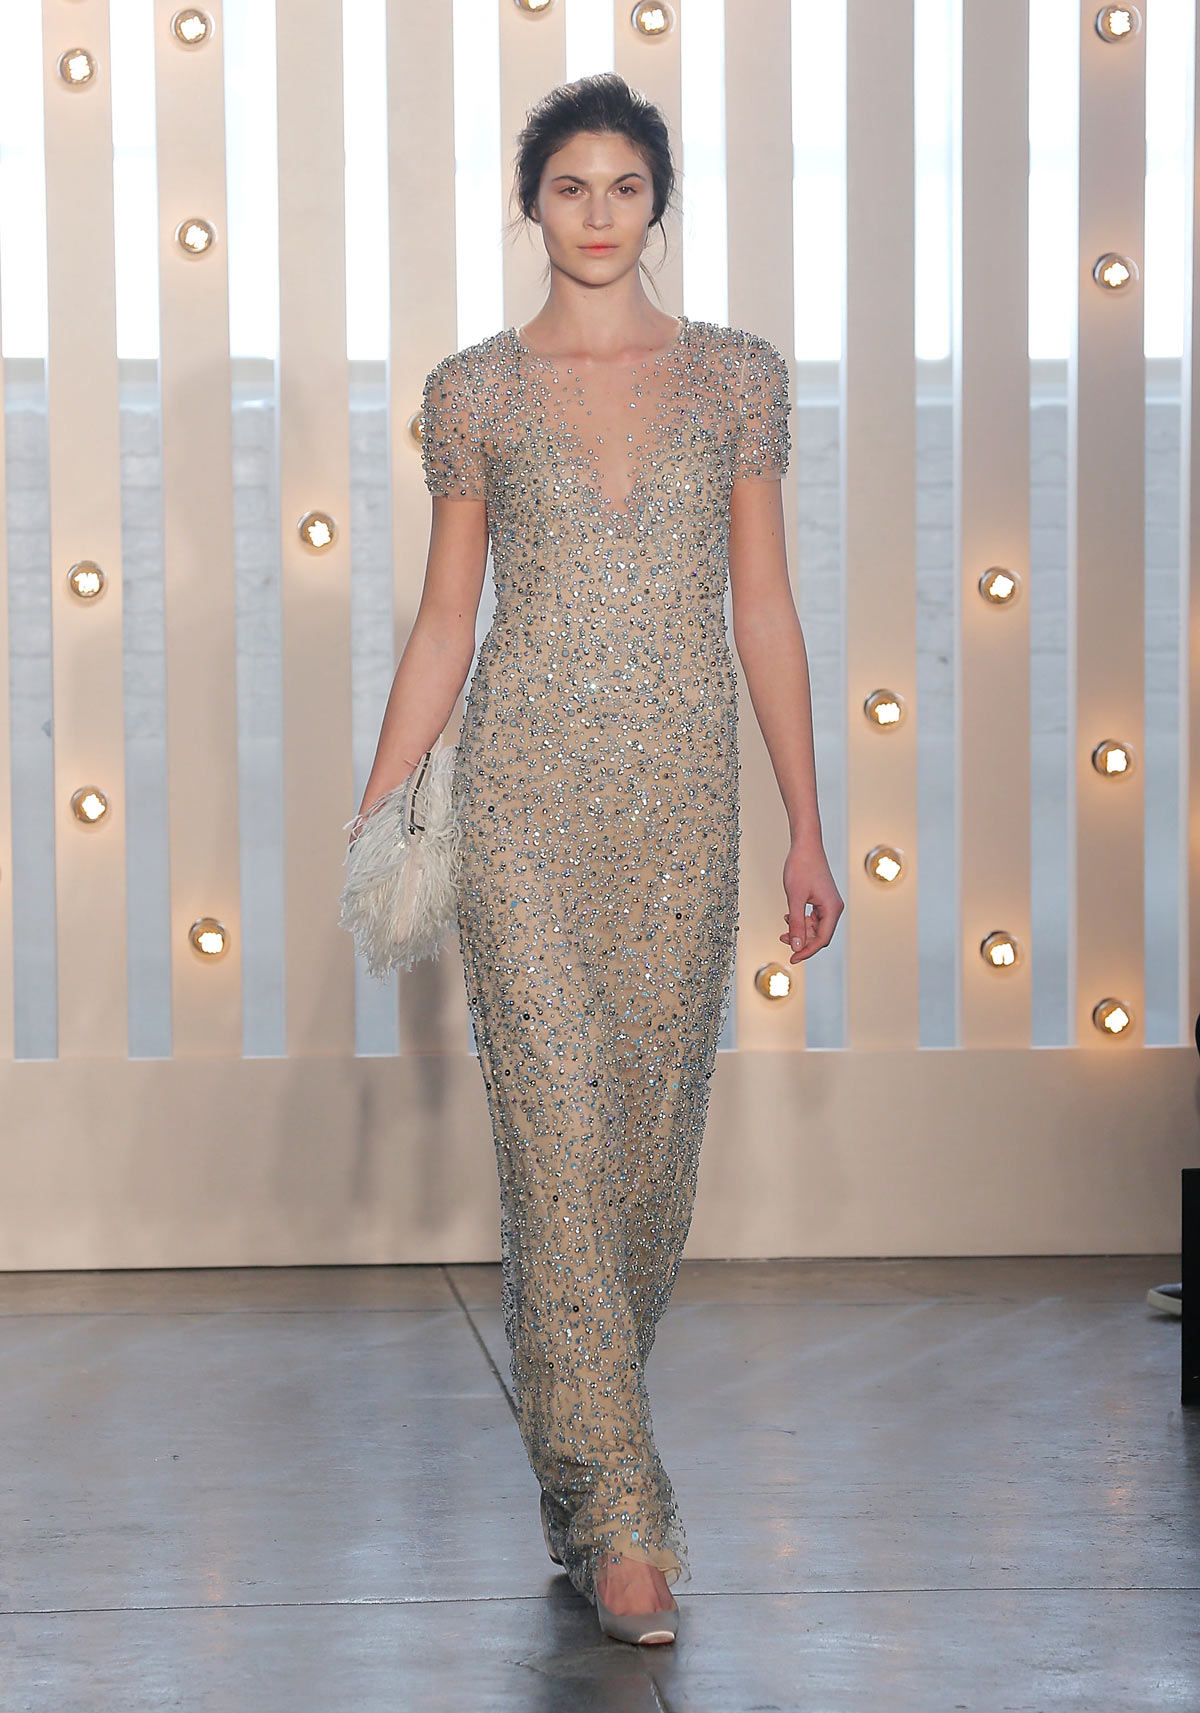 A model walks the runway at the Jenny Packham fashion show during Mercedes-Benz Fashion Week Fall 2014 on February 10, 2014 in New York City.